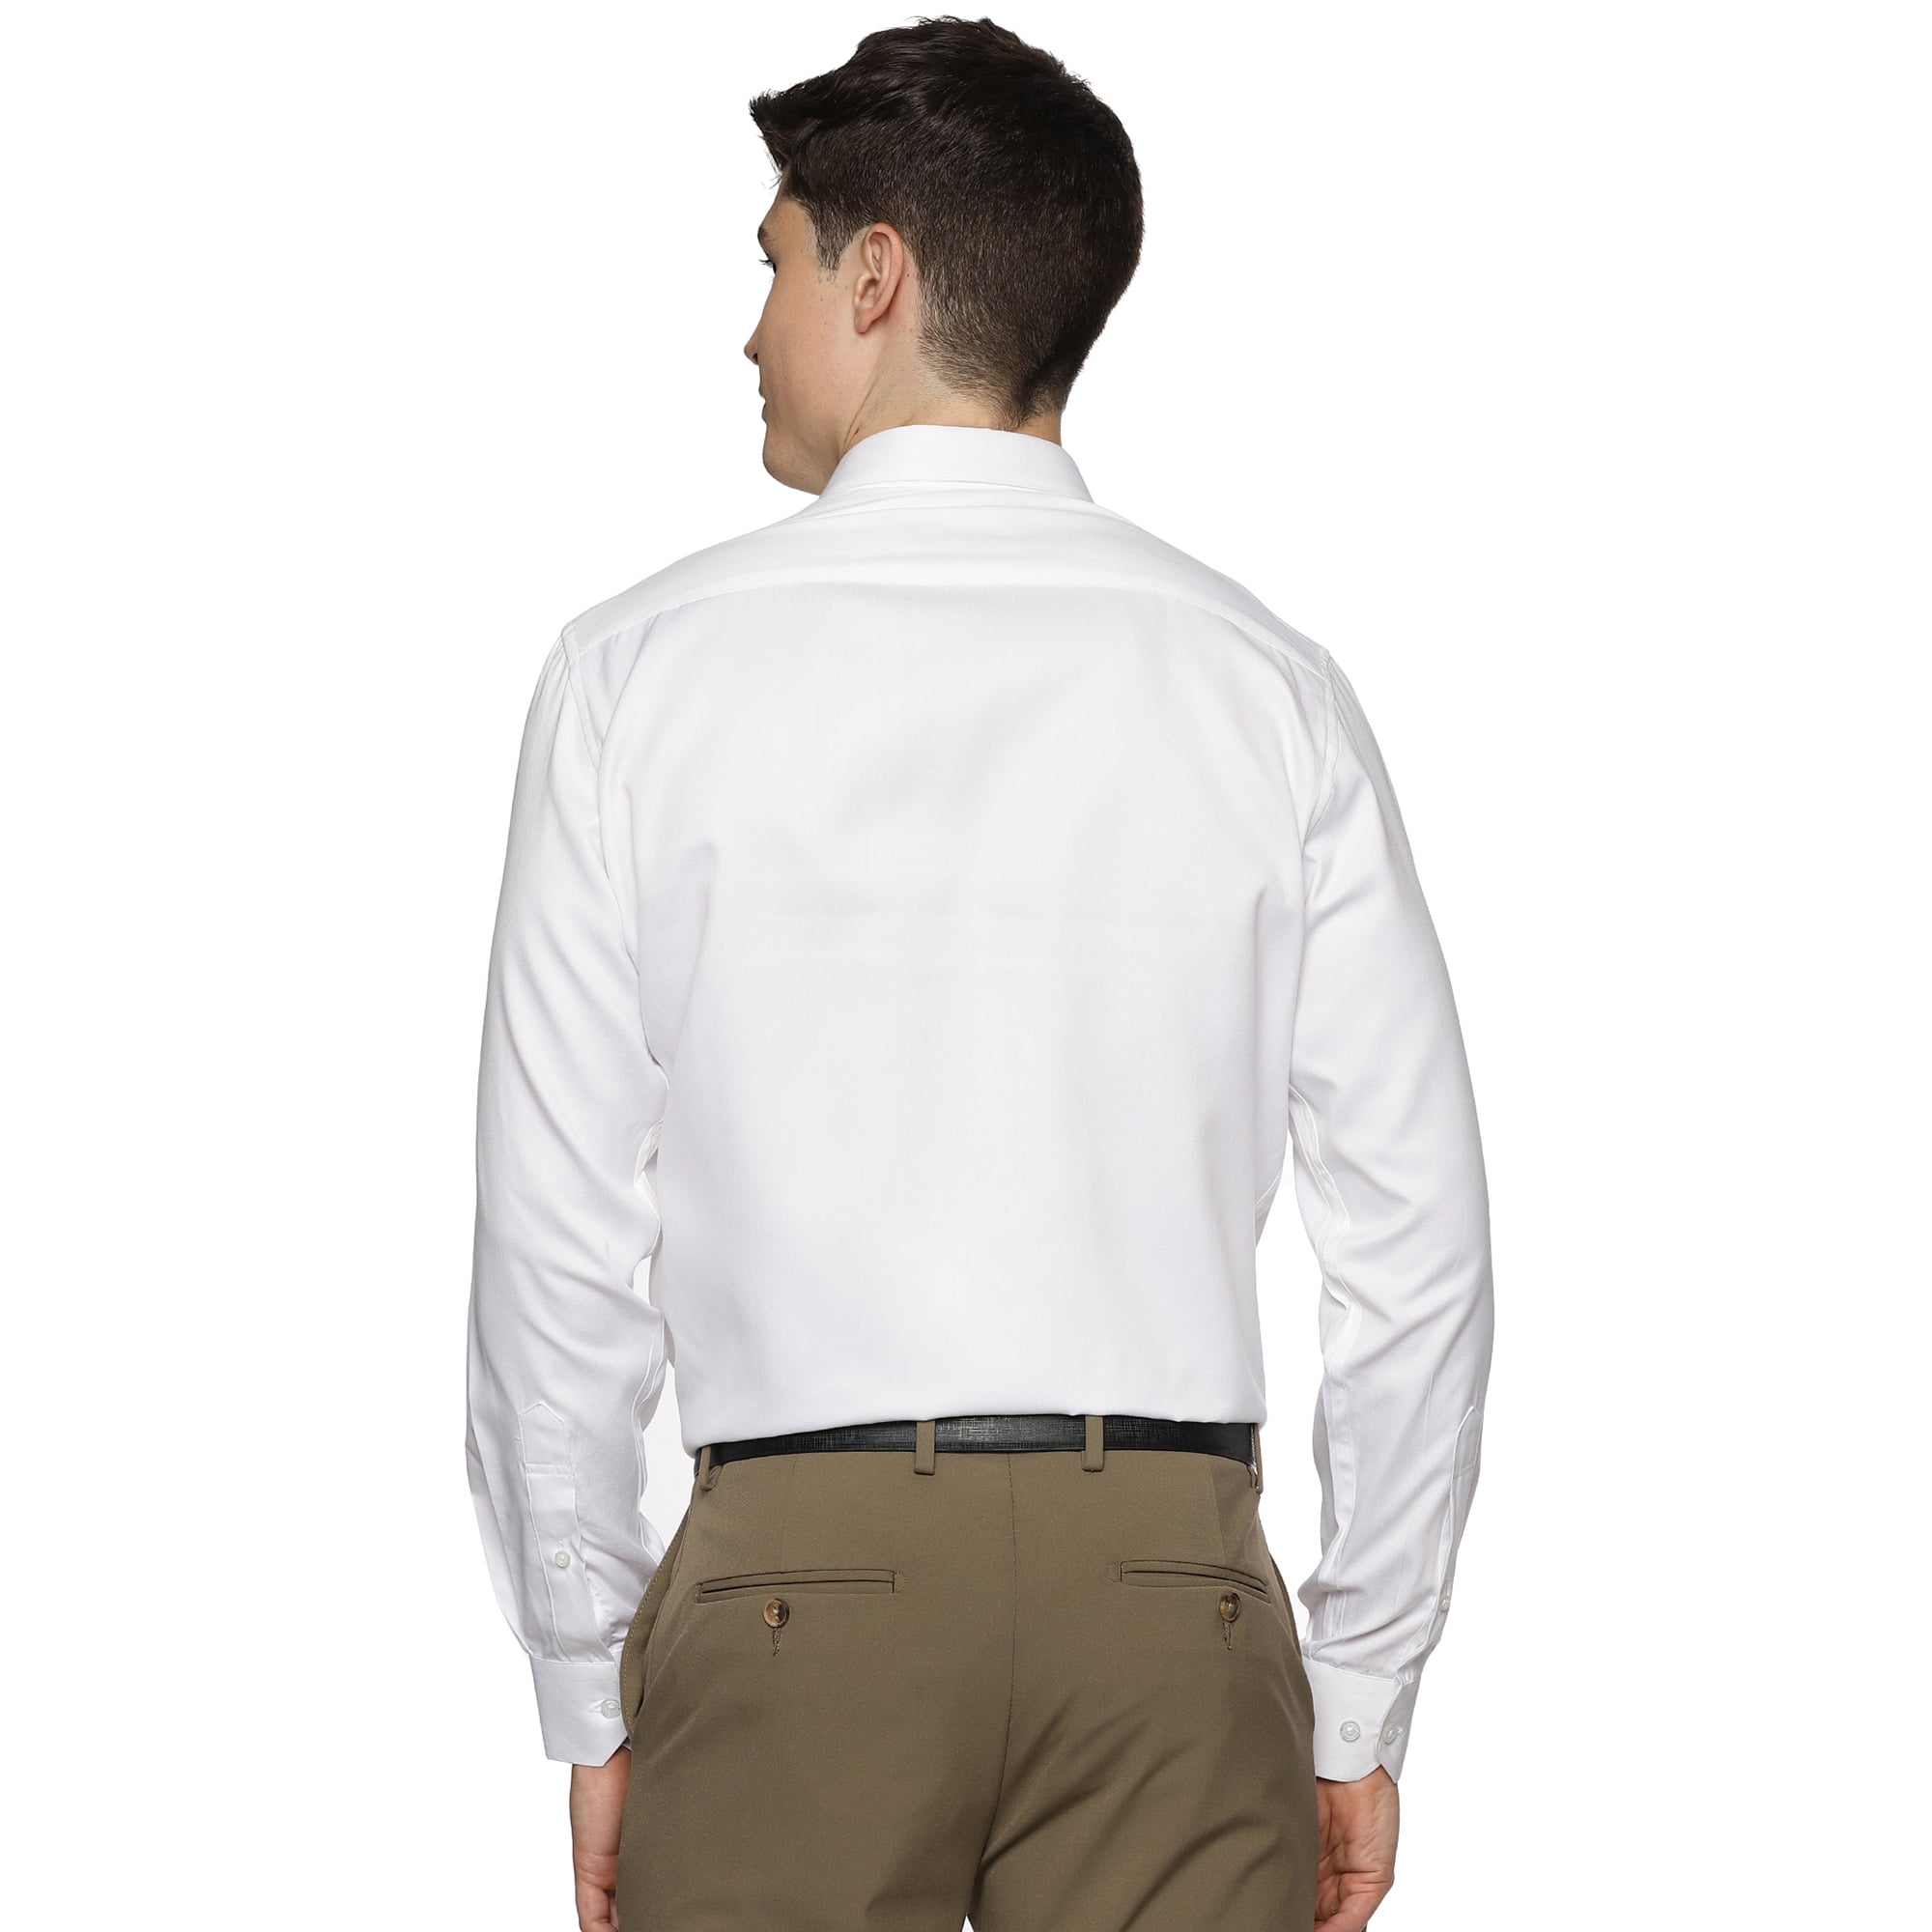 Donald Dobby Textured Shirt in White - The Formal Club